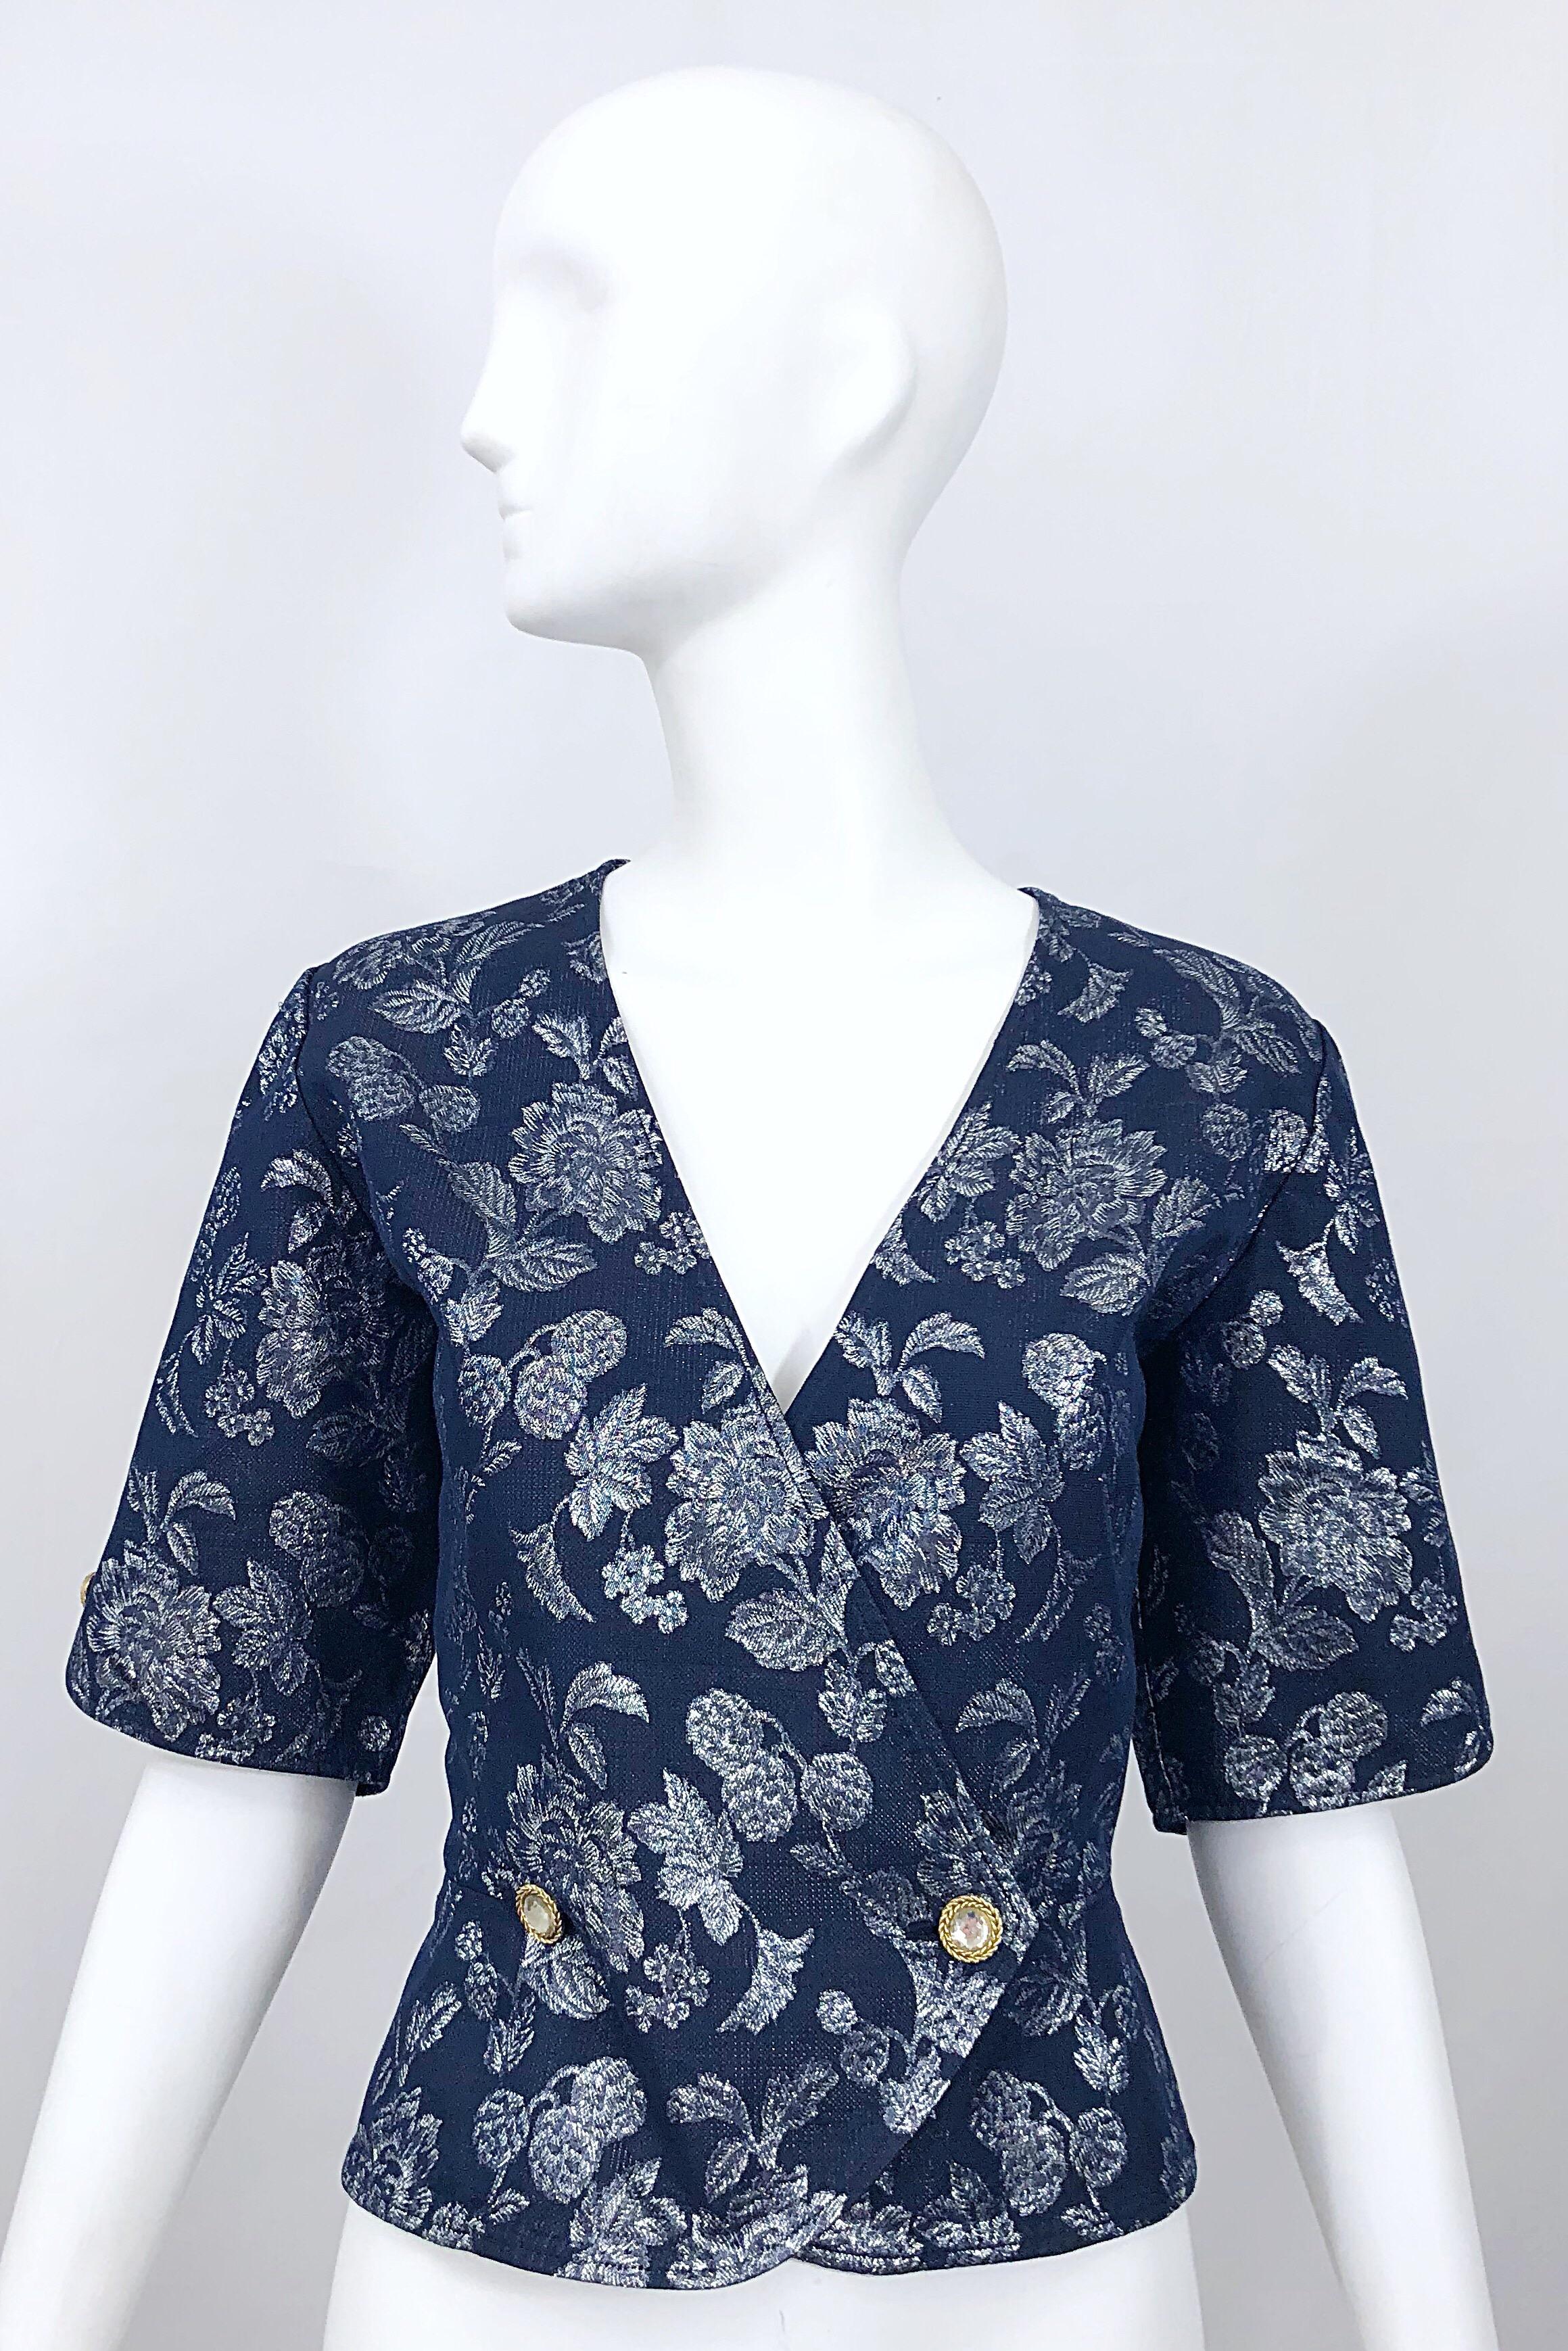 Beautiful vintage 1990s EMANUEL UNGARO navy blue and silver gunmetal double breasted blouse jacket! Features a rich deep blue hue with muted silver metallic floral print throughout. Double breasted style with rhinestone buttons. Rhinestone button